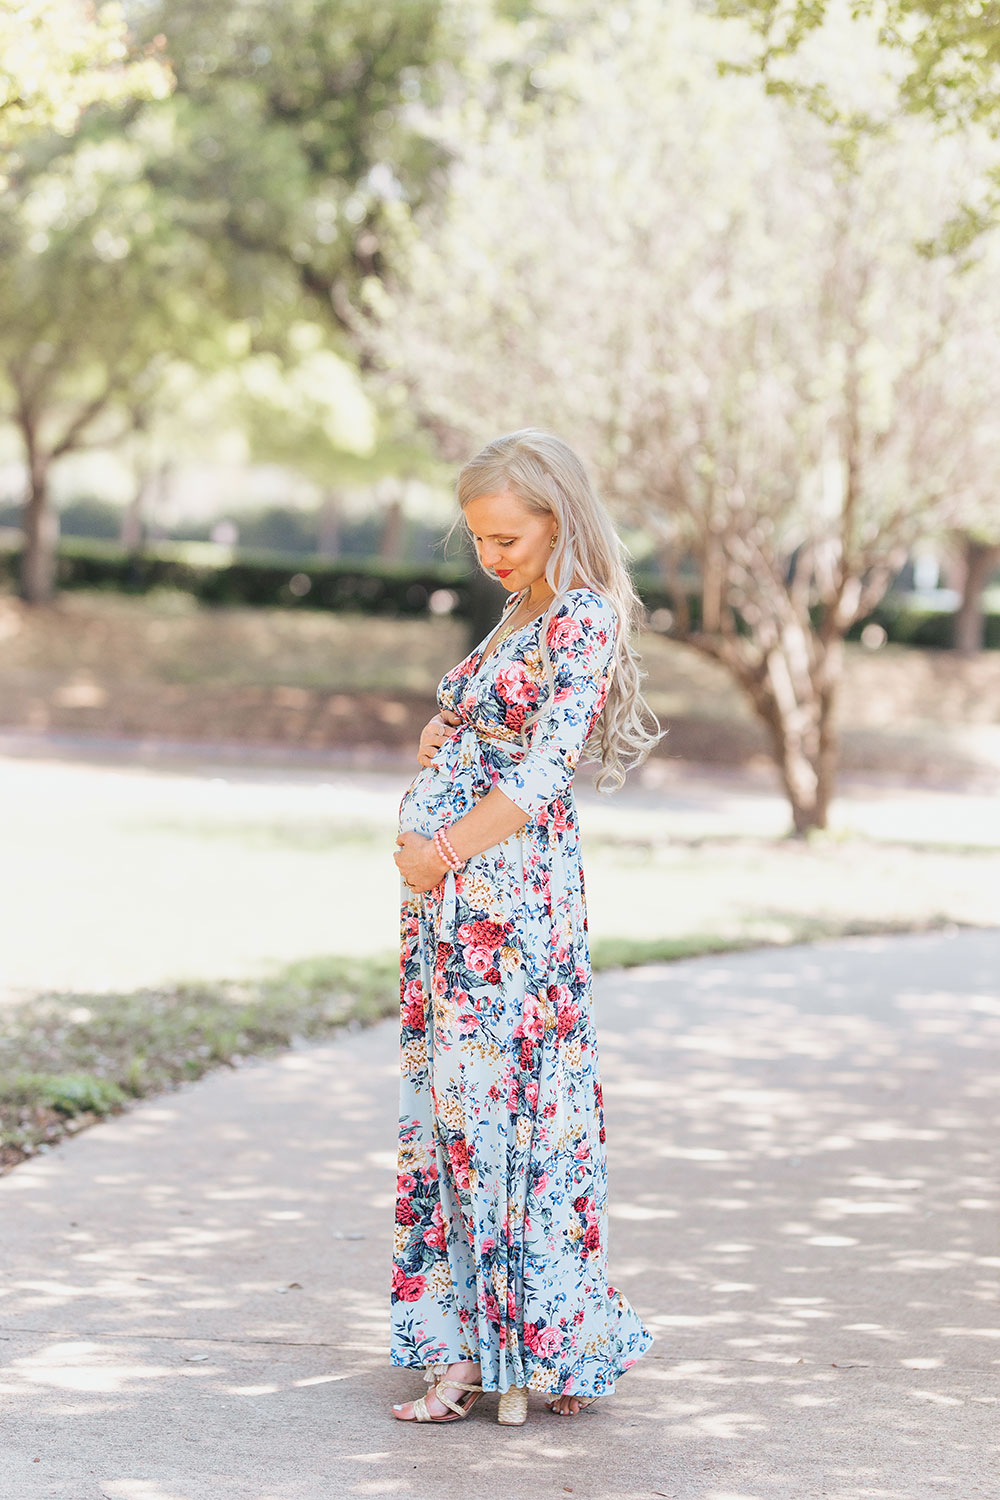 Maternity Dress For Baby Shower, Floral Dress, Maternity Photoshoot Dr